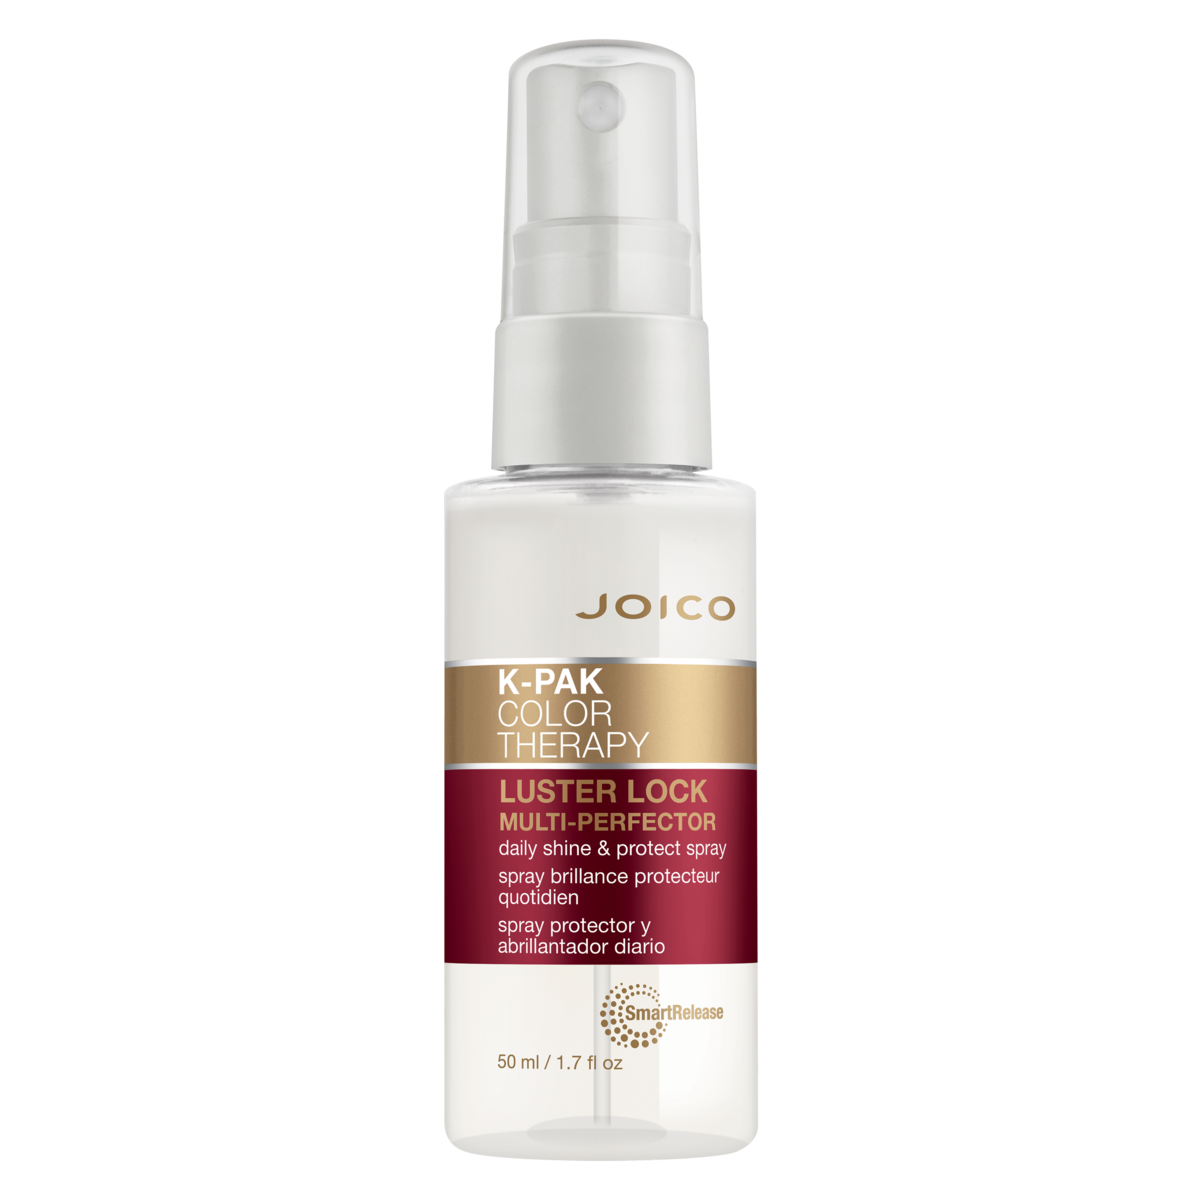 1. Joico K-Pak Color Therapy Luster Lock Instant Shine & Repair Treatment
2. Joico K-Pak Color Therapy Luster Lock Multi-Perfector Daily Shine & Protect Spray
3. Joico K-Pak Color Therapy Luster Lock Glossing Oil
4. Joico K-Pak Color Therapy Luster Lock Leave-In Protectant
5. Joico K-Pak Color Therapy Luster Lock Instant Shine & Repair Treatment Travel Size
6. Joico K-Pak Color Therapy Luster Lock Multi-Perfector Daily Shine & Protect Spray Travel Size
7. Joico K-Pak Color Therapy Luster Lock Glossing Oil Travel Size
8. Joico K-Pak Color Therapy Luster Lock Leave-In Protectant Travel Size
9. Joico K-Pak Color Therapy Luster Lock Instant Shine & Repair Treatment Duo Set
10. Joico K-Pak Color Therapy Luster Lock Multi-Perfector Daily Shine & Protect Spray Duo Set - wide 5